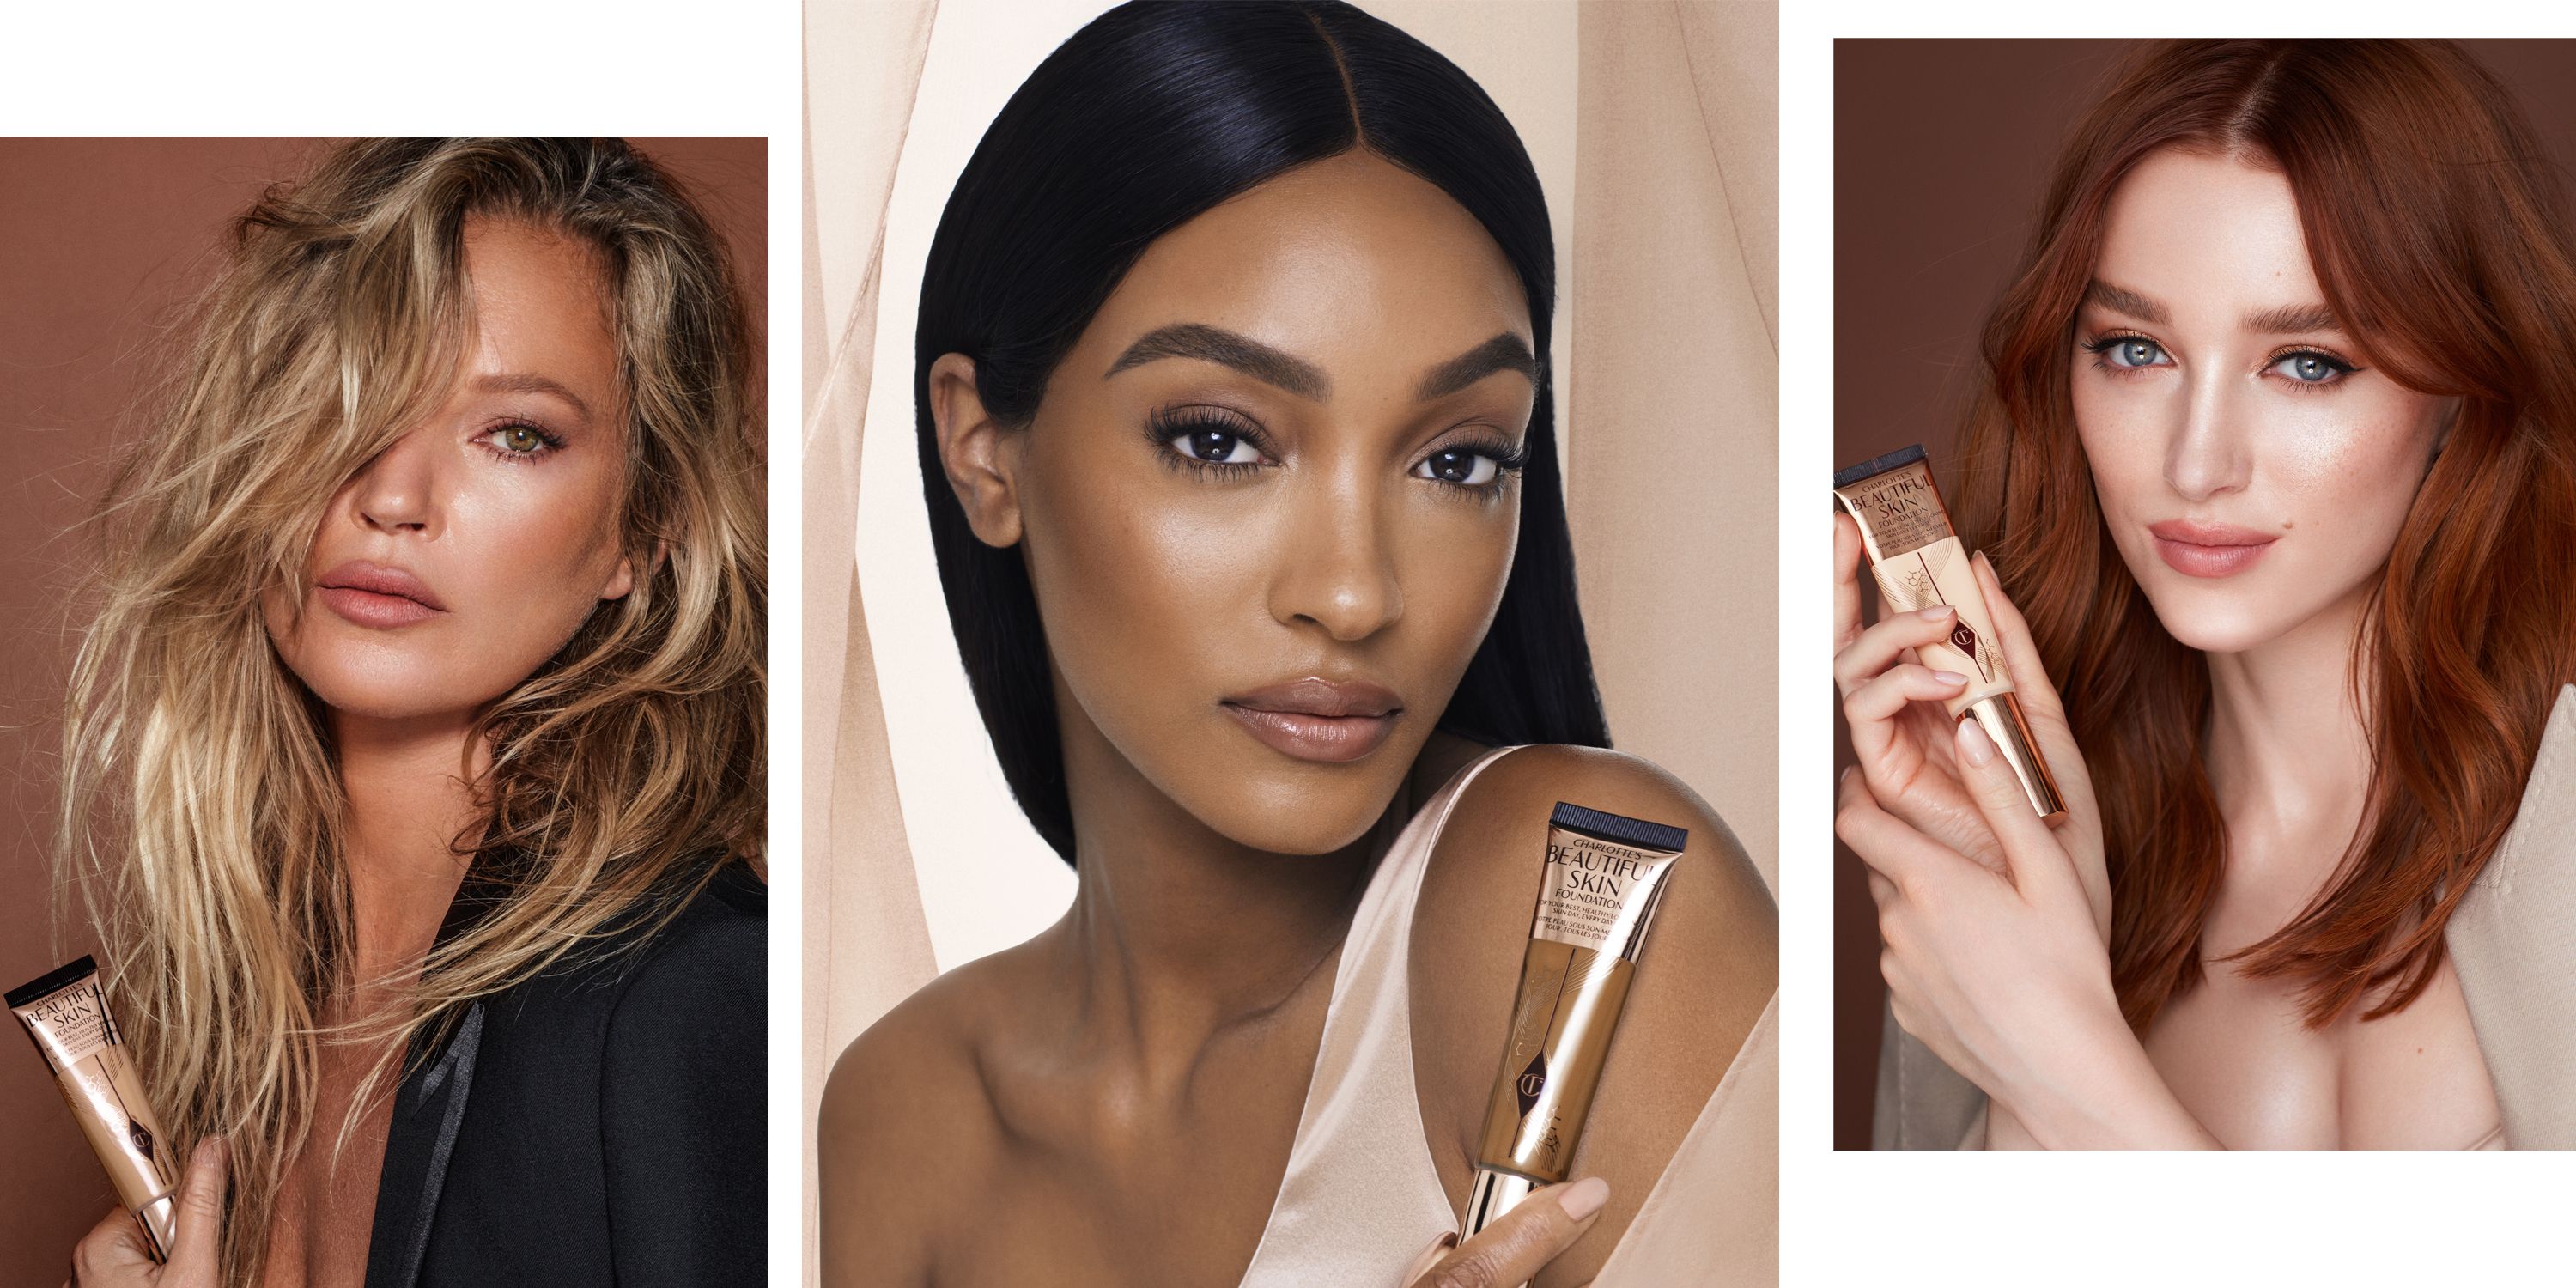 Charlotte Tilbury Just Dropped a New Foundation